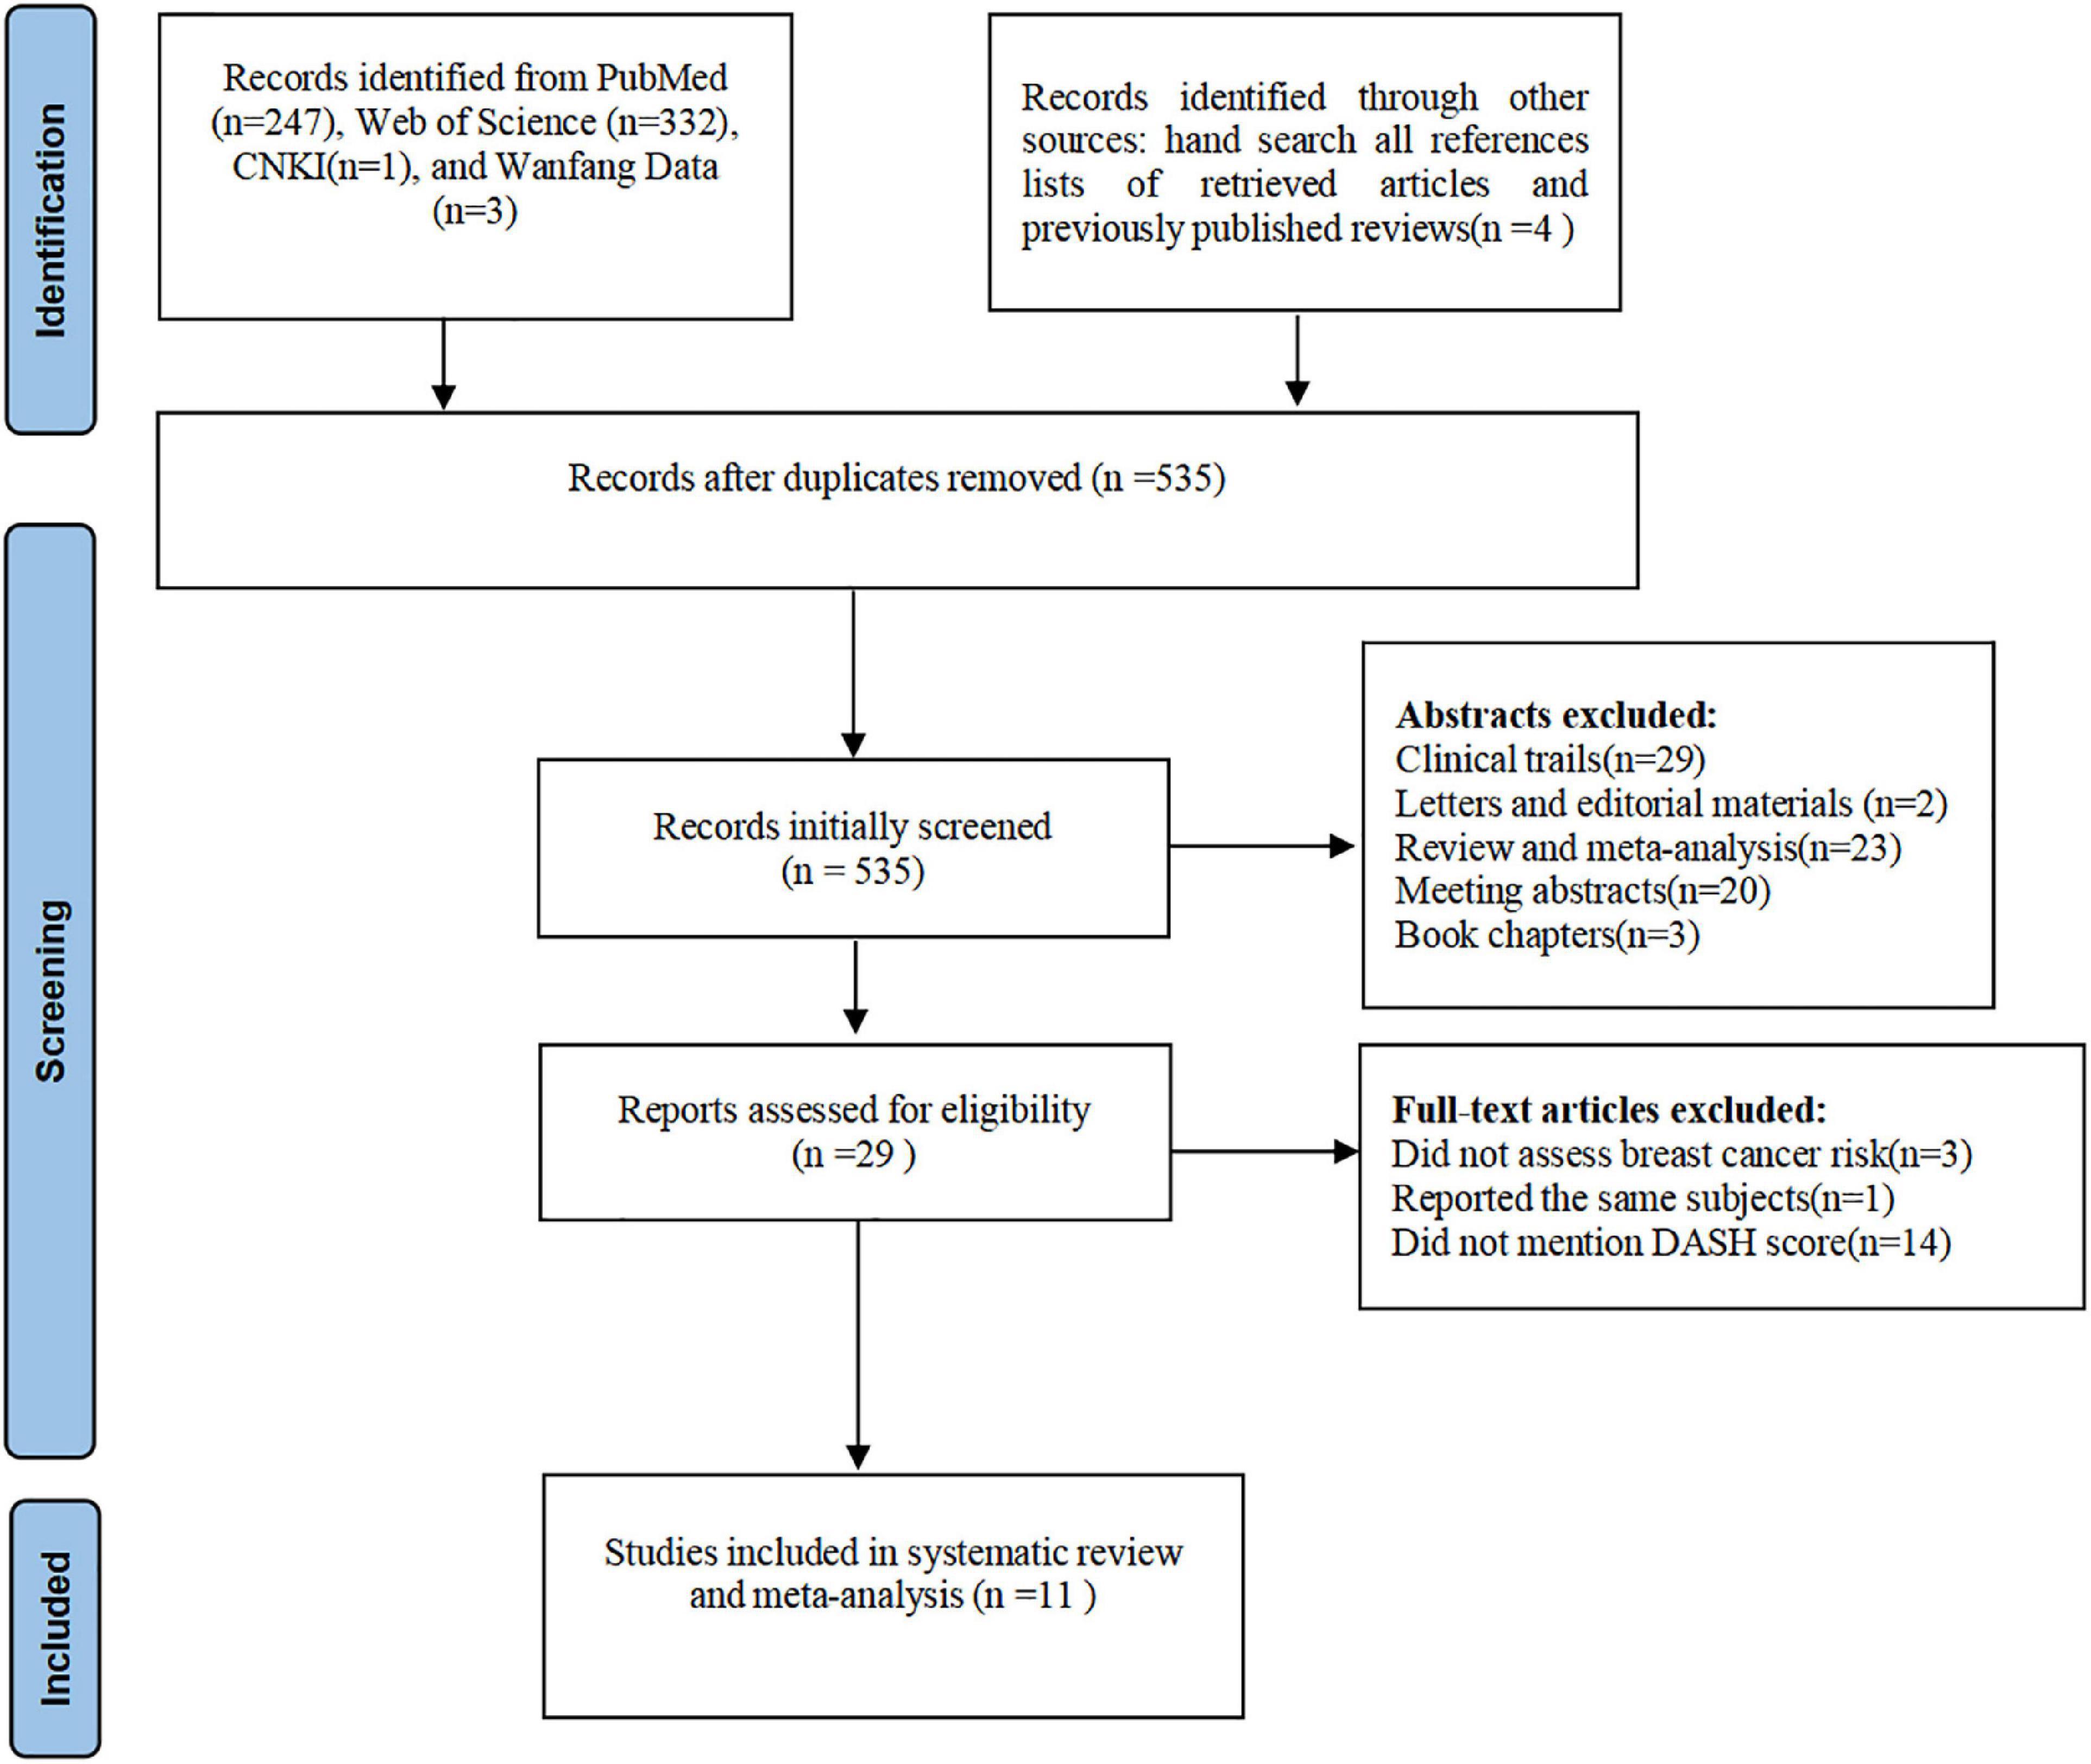 Adherence to the Dietary Approaches to Stop Hypertension diet reduces the risk of breast cancer: A systematic review and meta-analysis